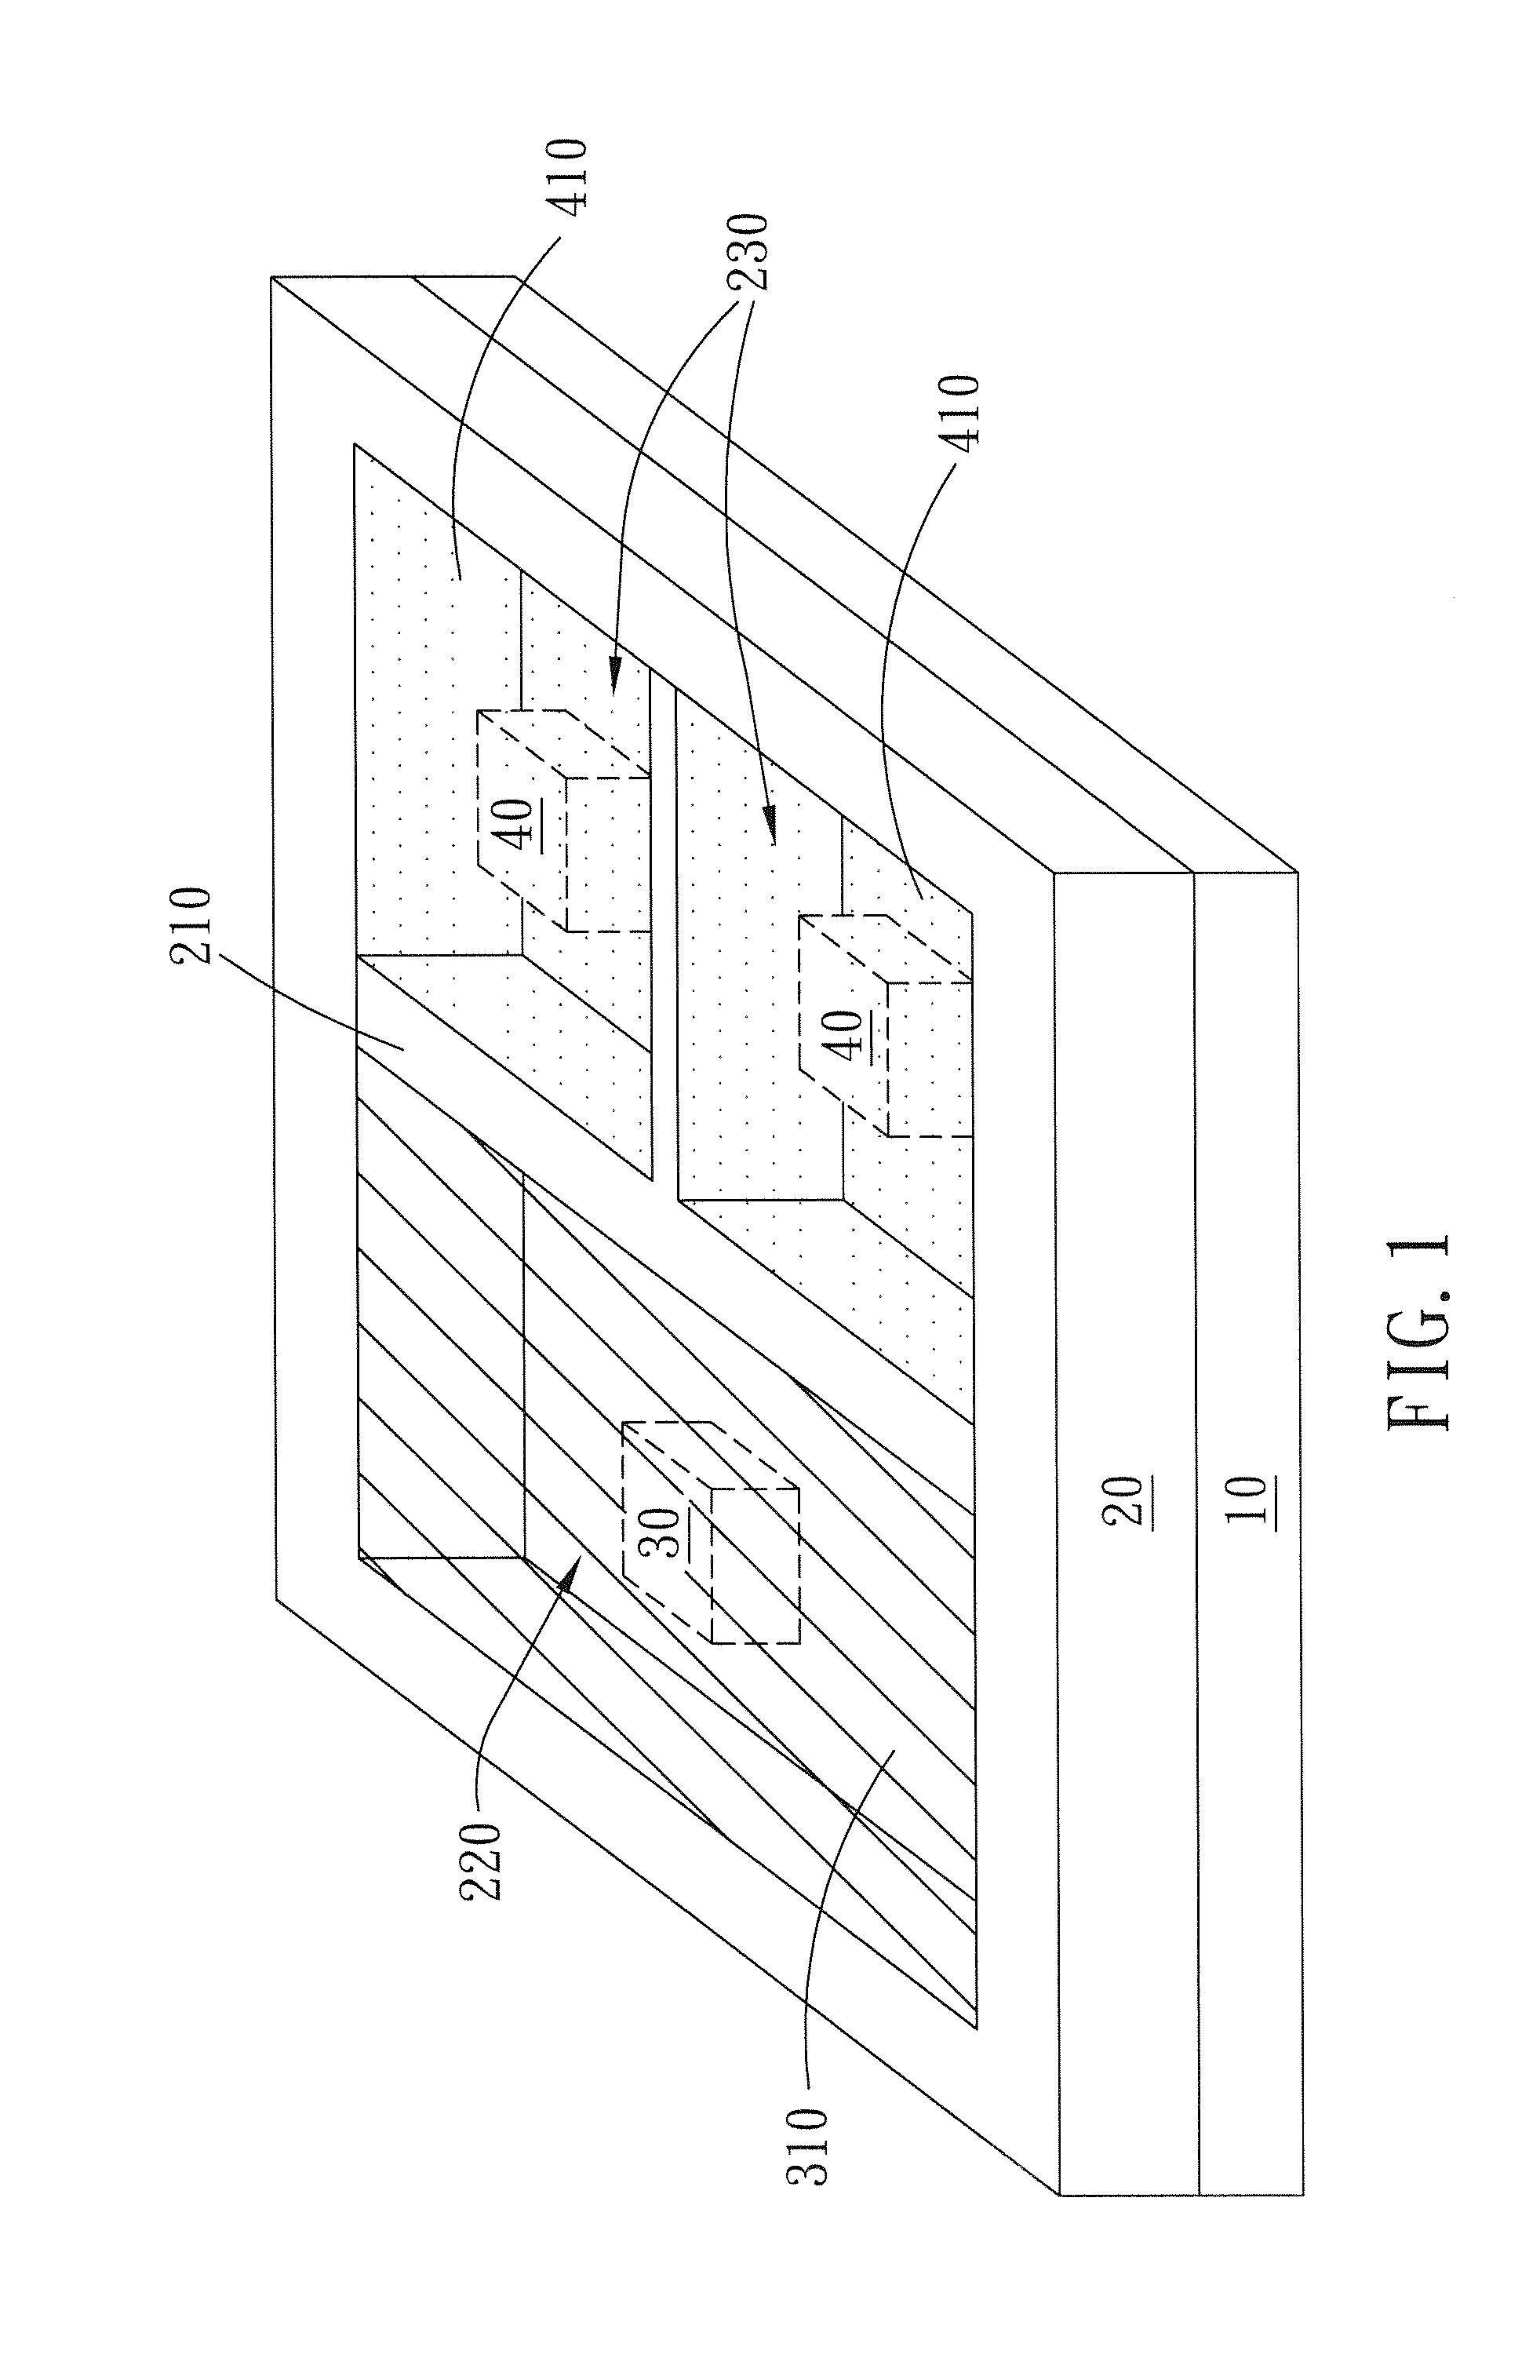 Color-mixing light-emitting diode module